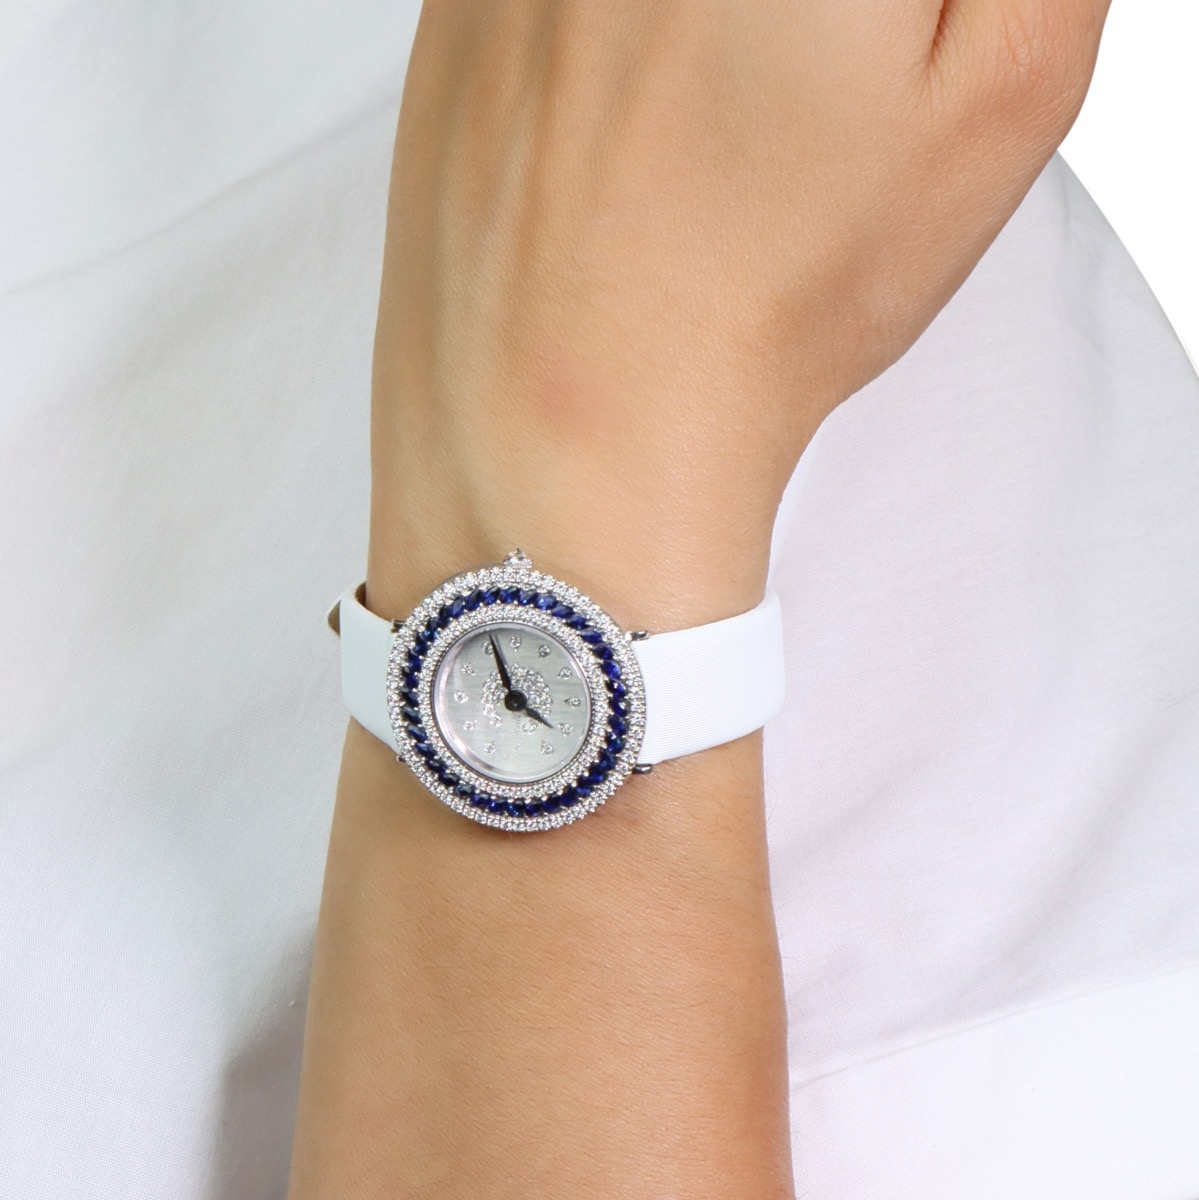 White gold watch with diamonds and blue sapphires